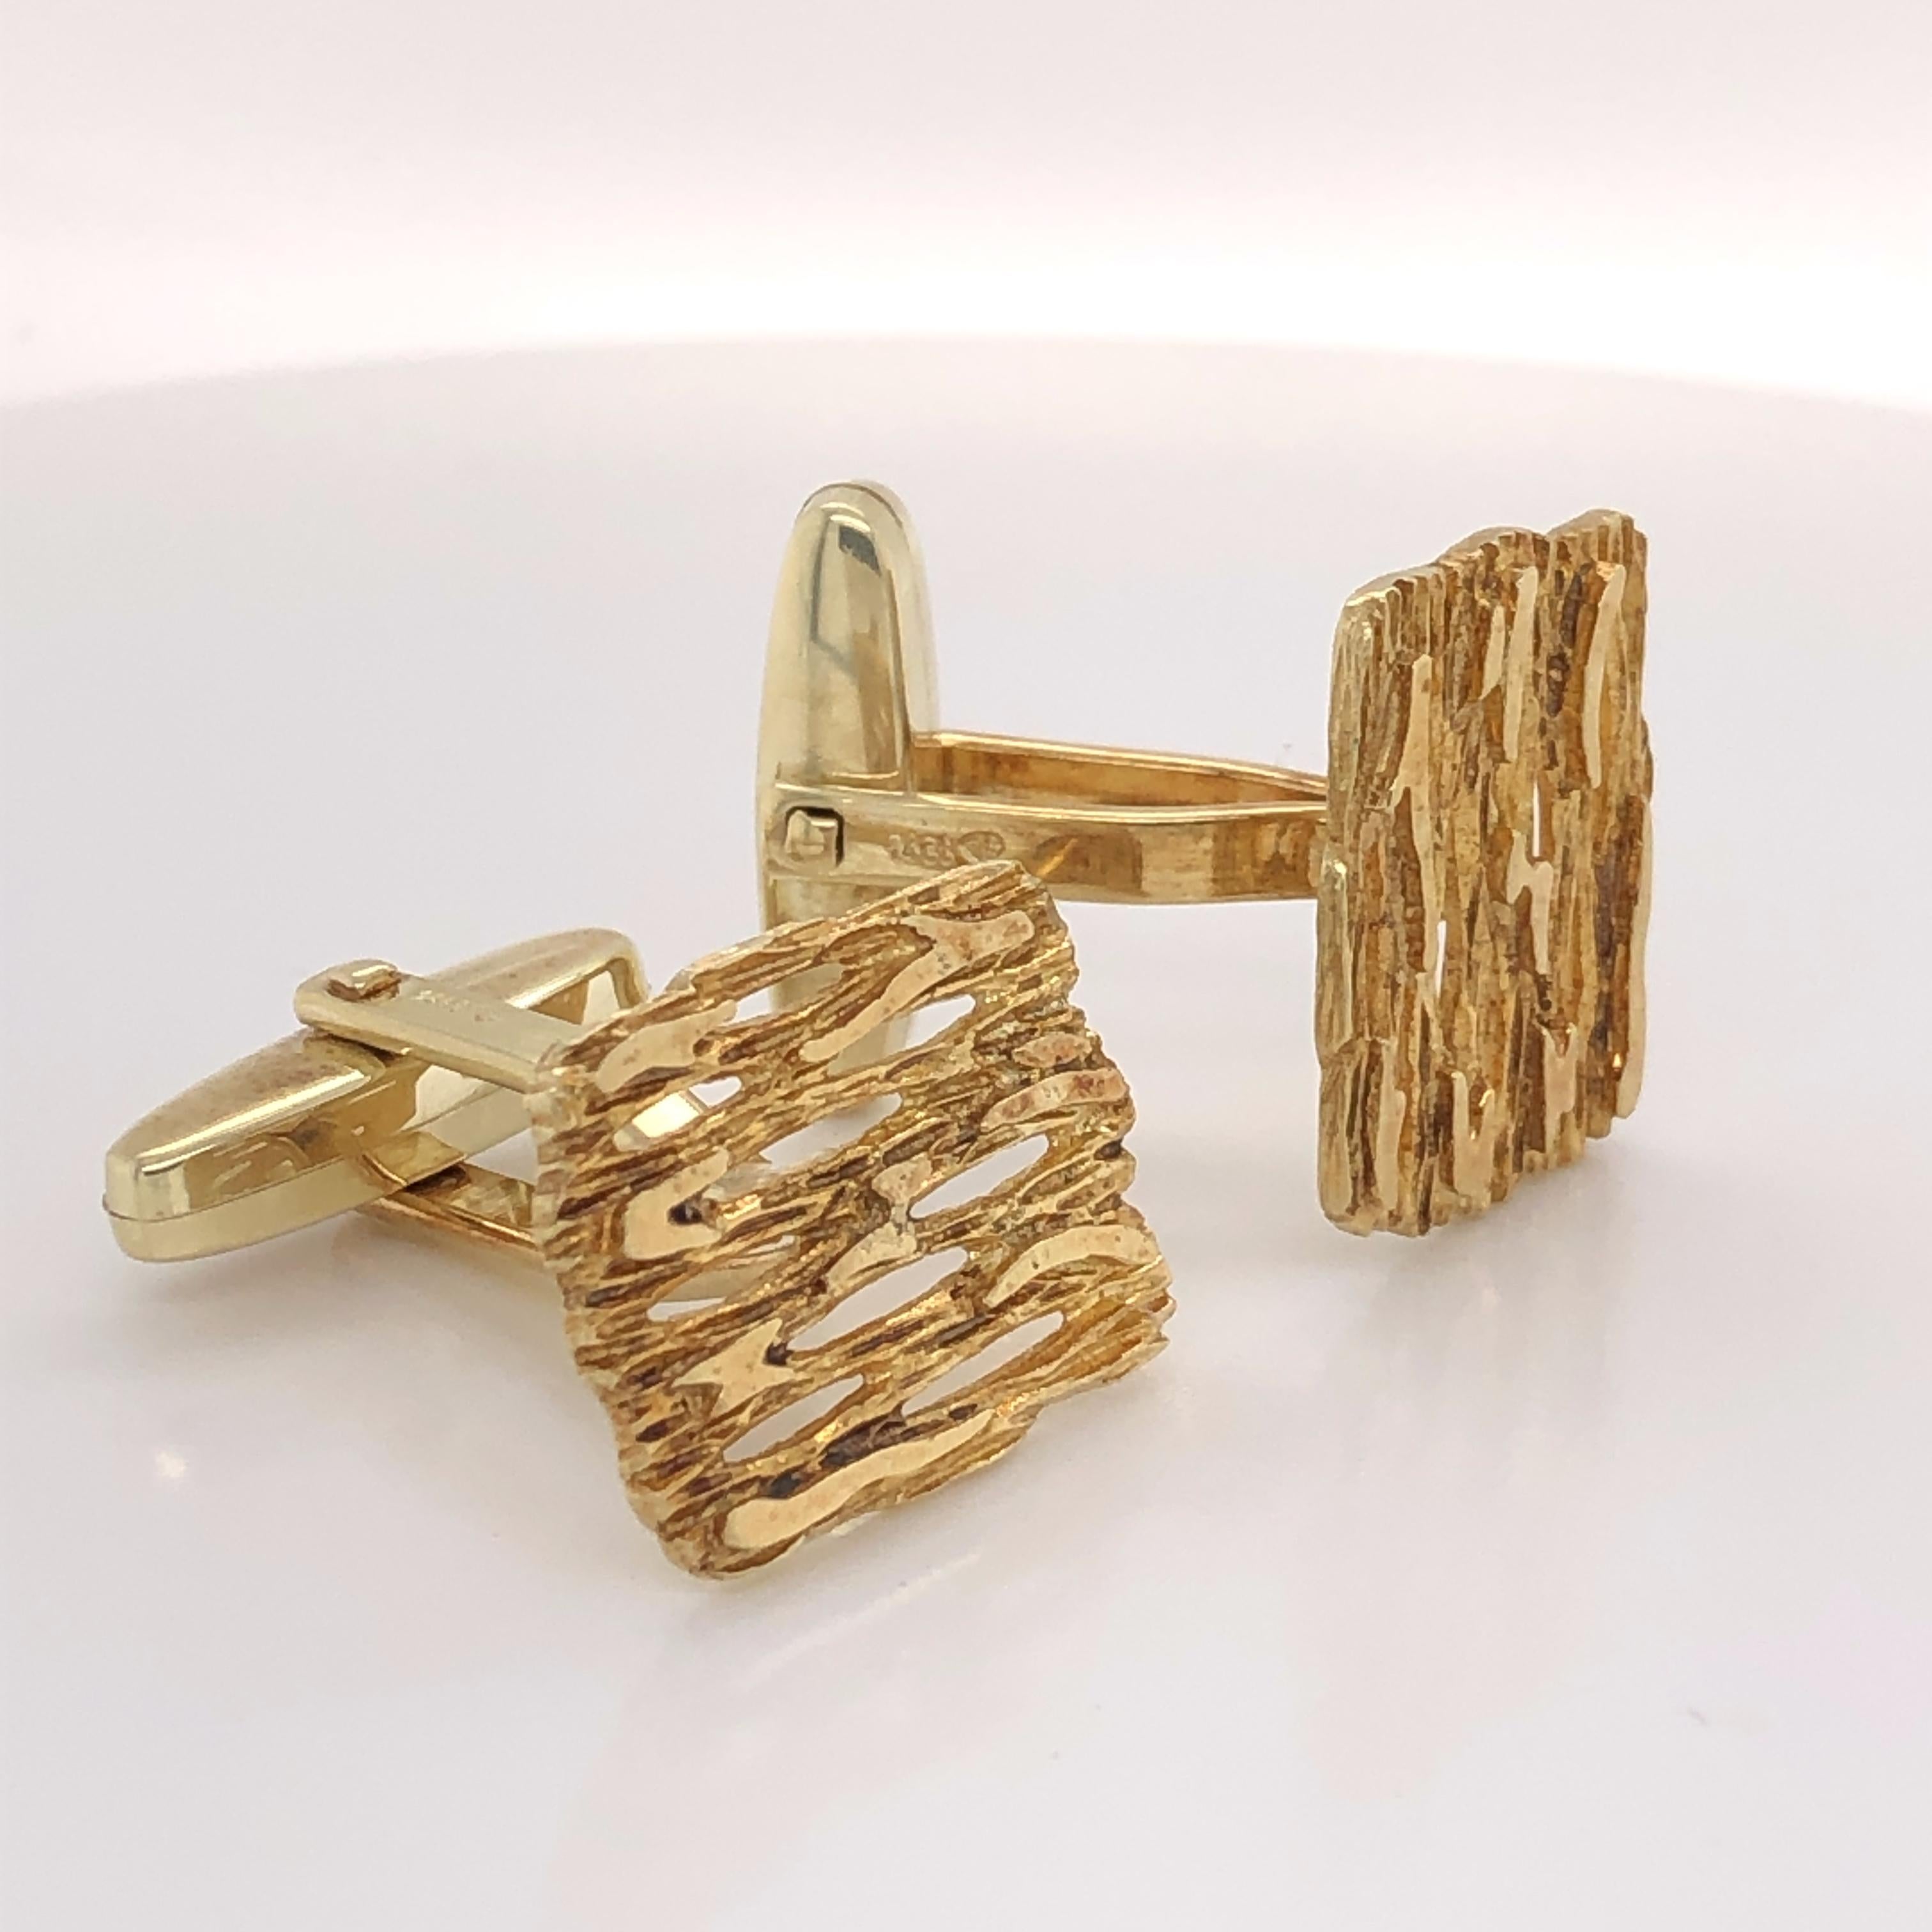 For that tailored look. Abstract design in textured fourteen karat  (14k) yellow gold. Unisex style cuff links with bullet (toggle) backs. Measures 1/2 inch x 3/4 inch. In gift box.